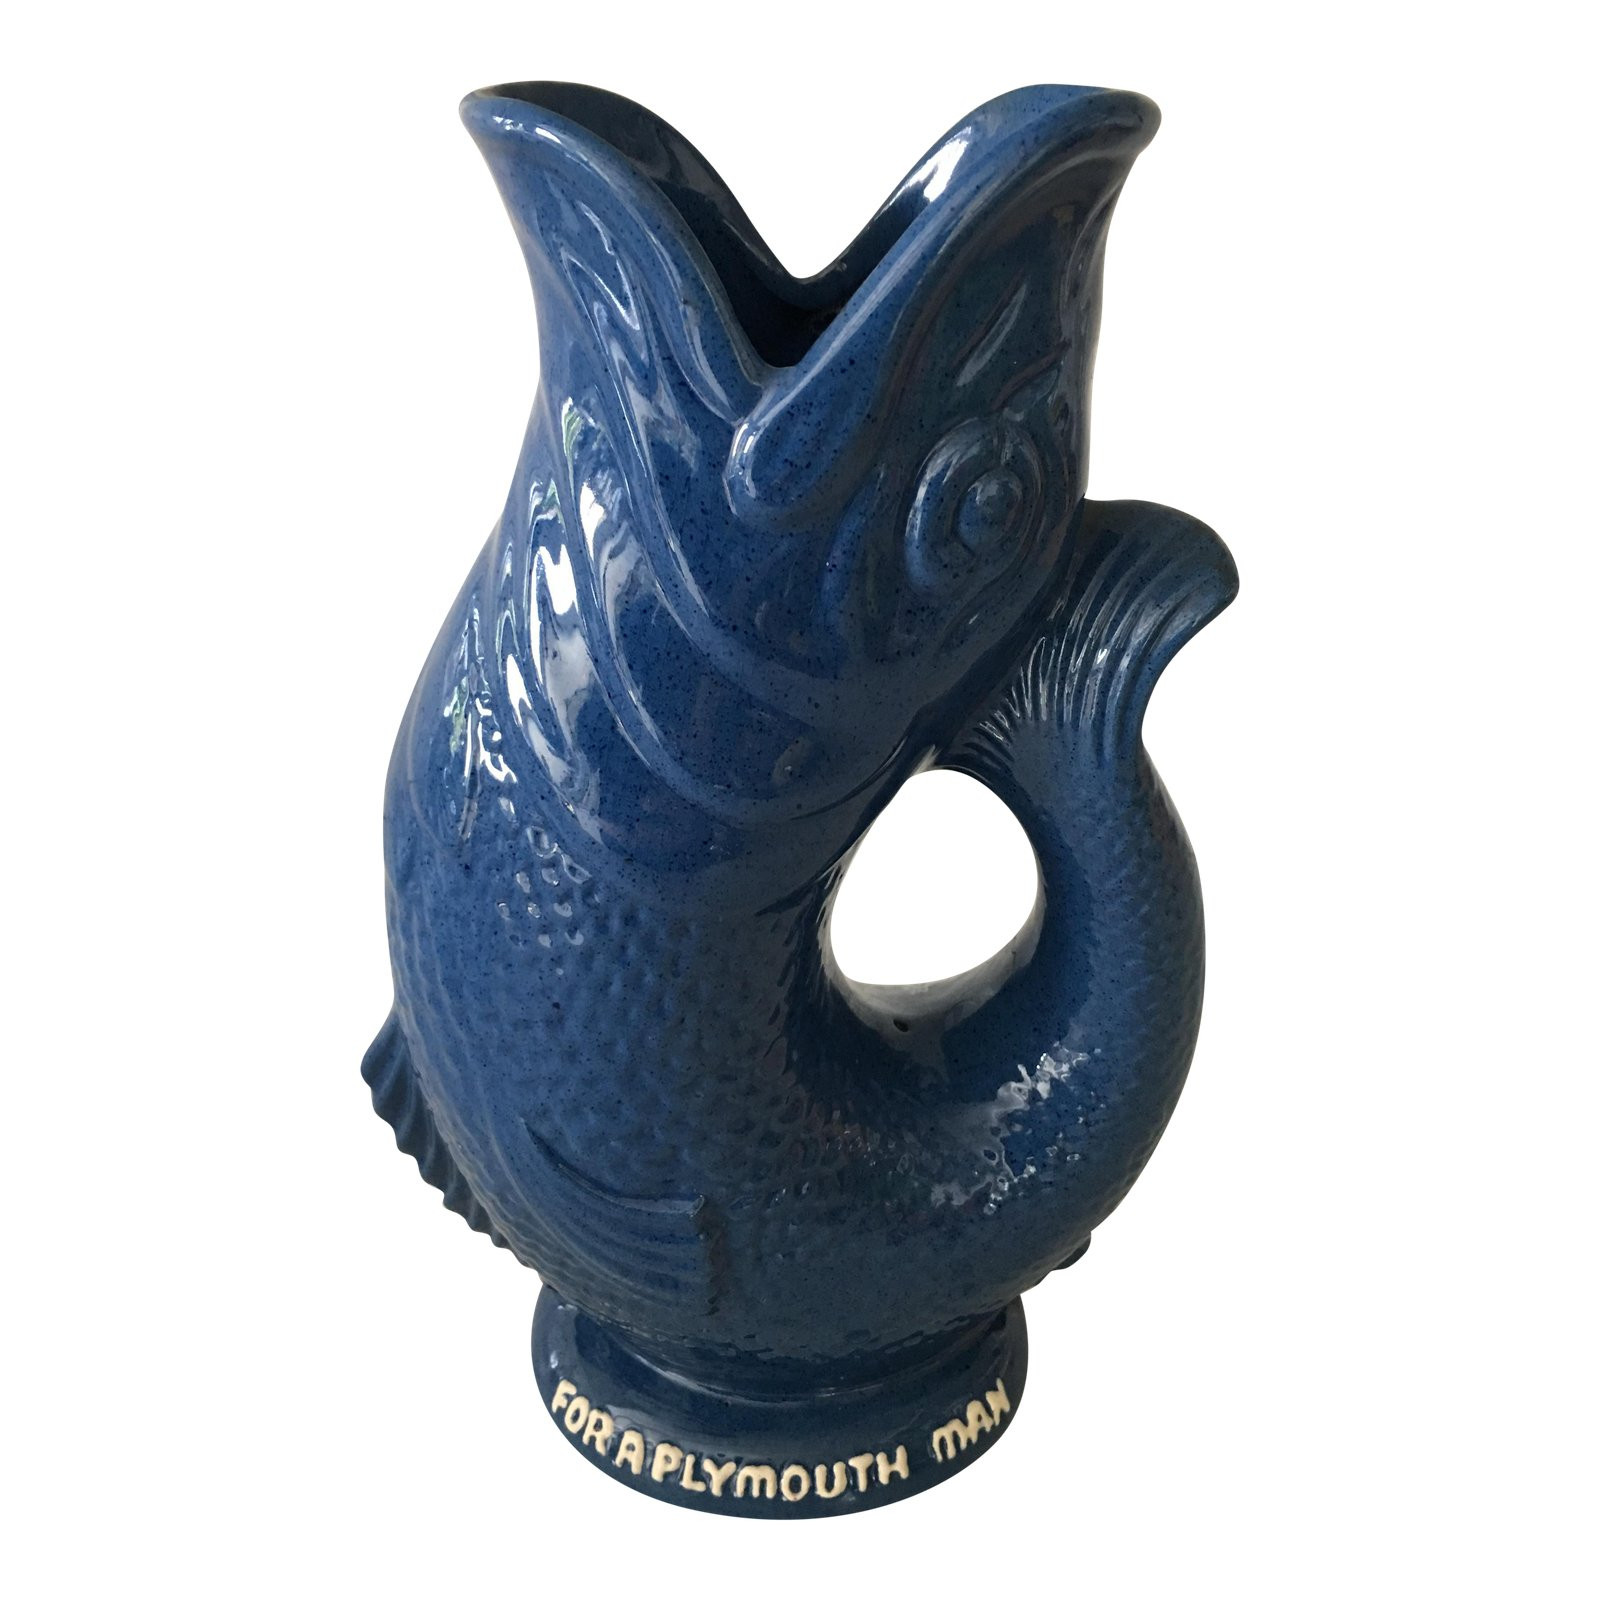 gurgling fish vase of plymouth gin gurgling fish jug chairish in plymouth gin gurgling fish jug 7494